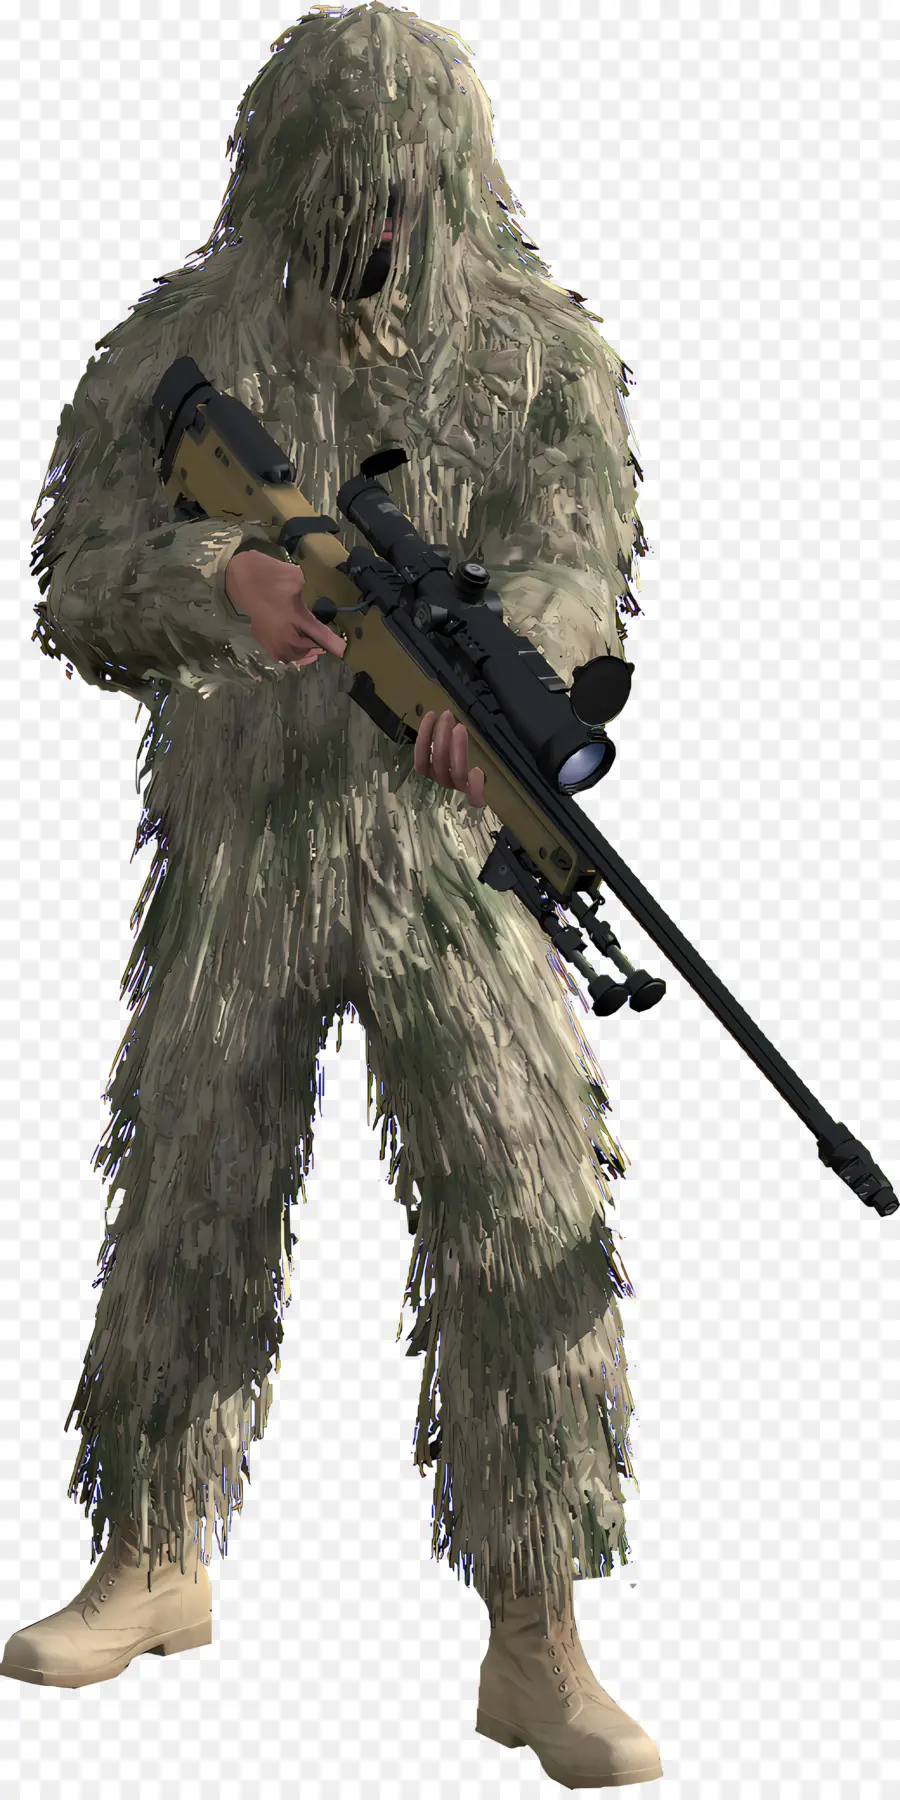 call of duty war soldier soldier camouflage